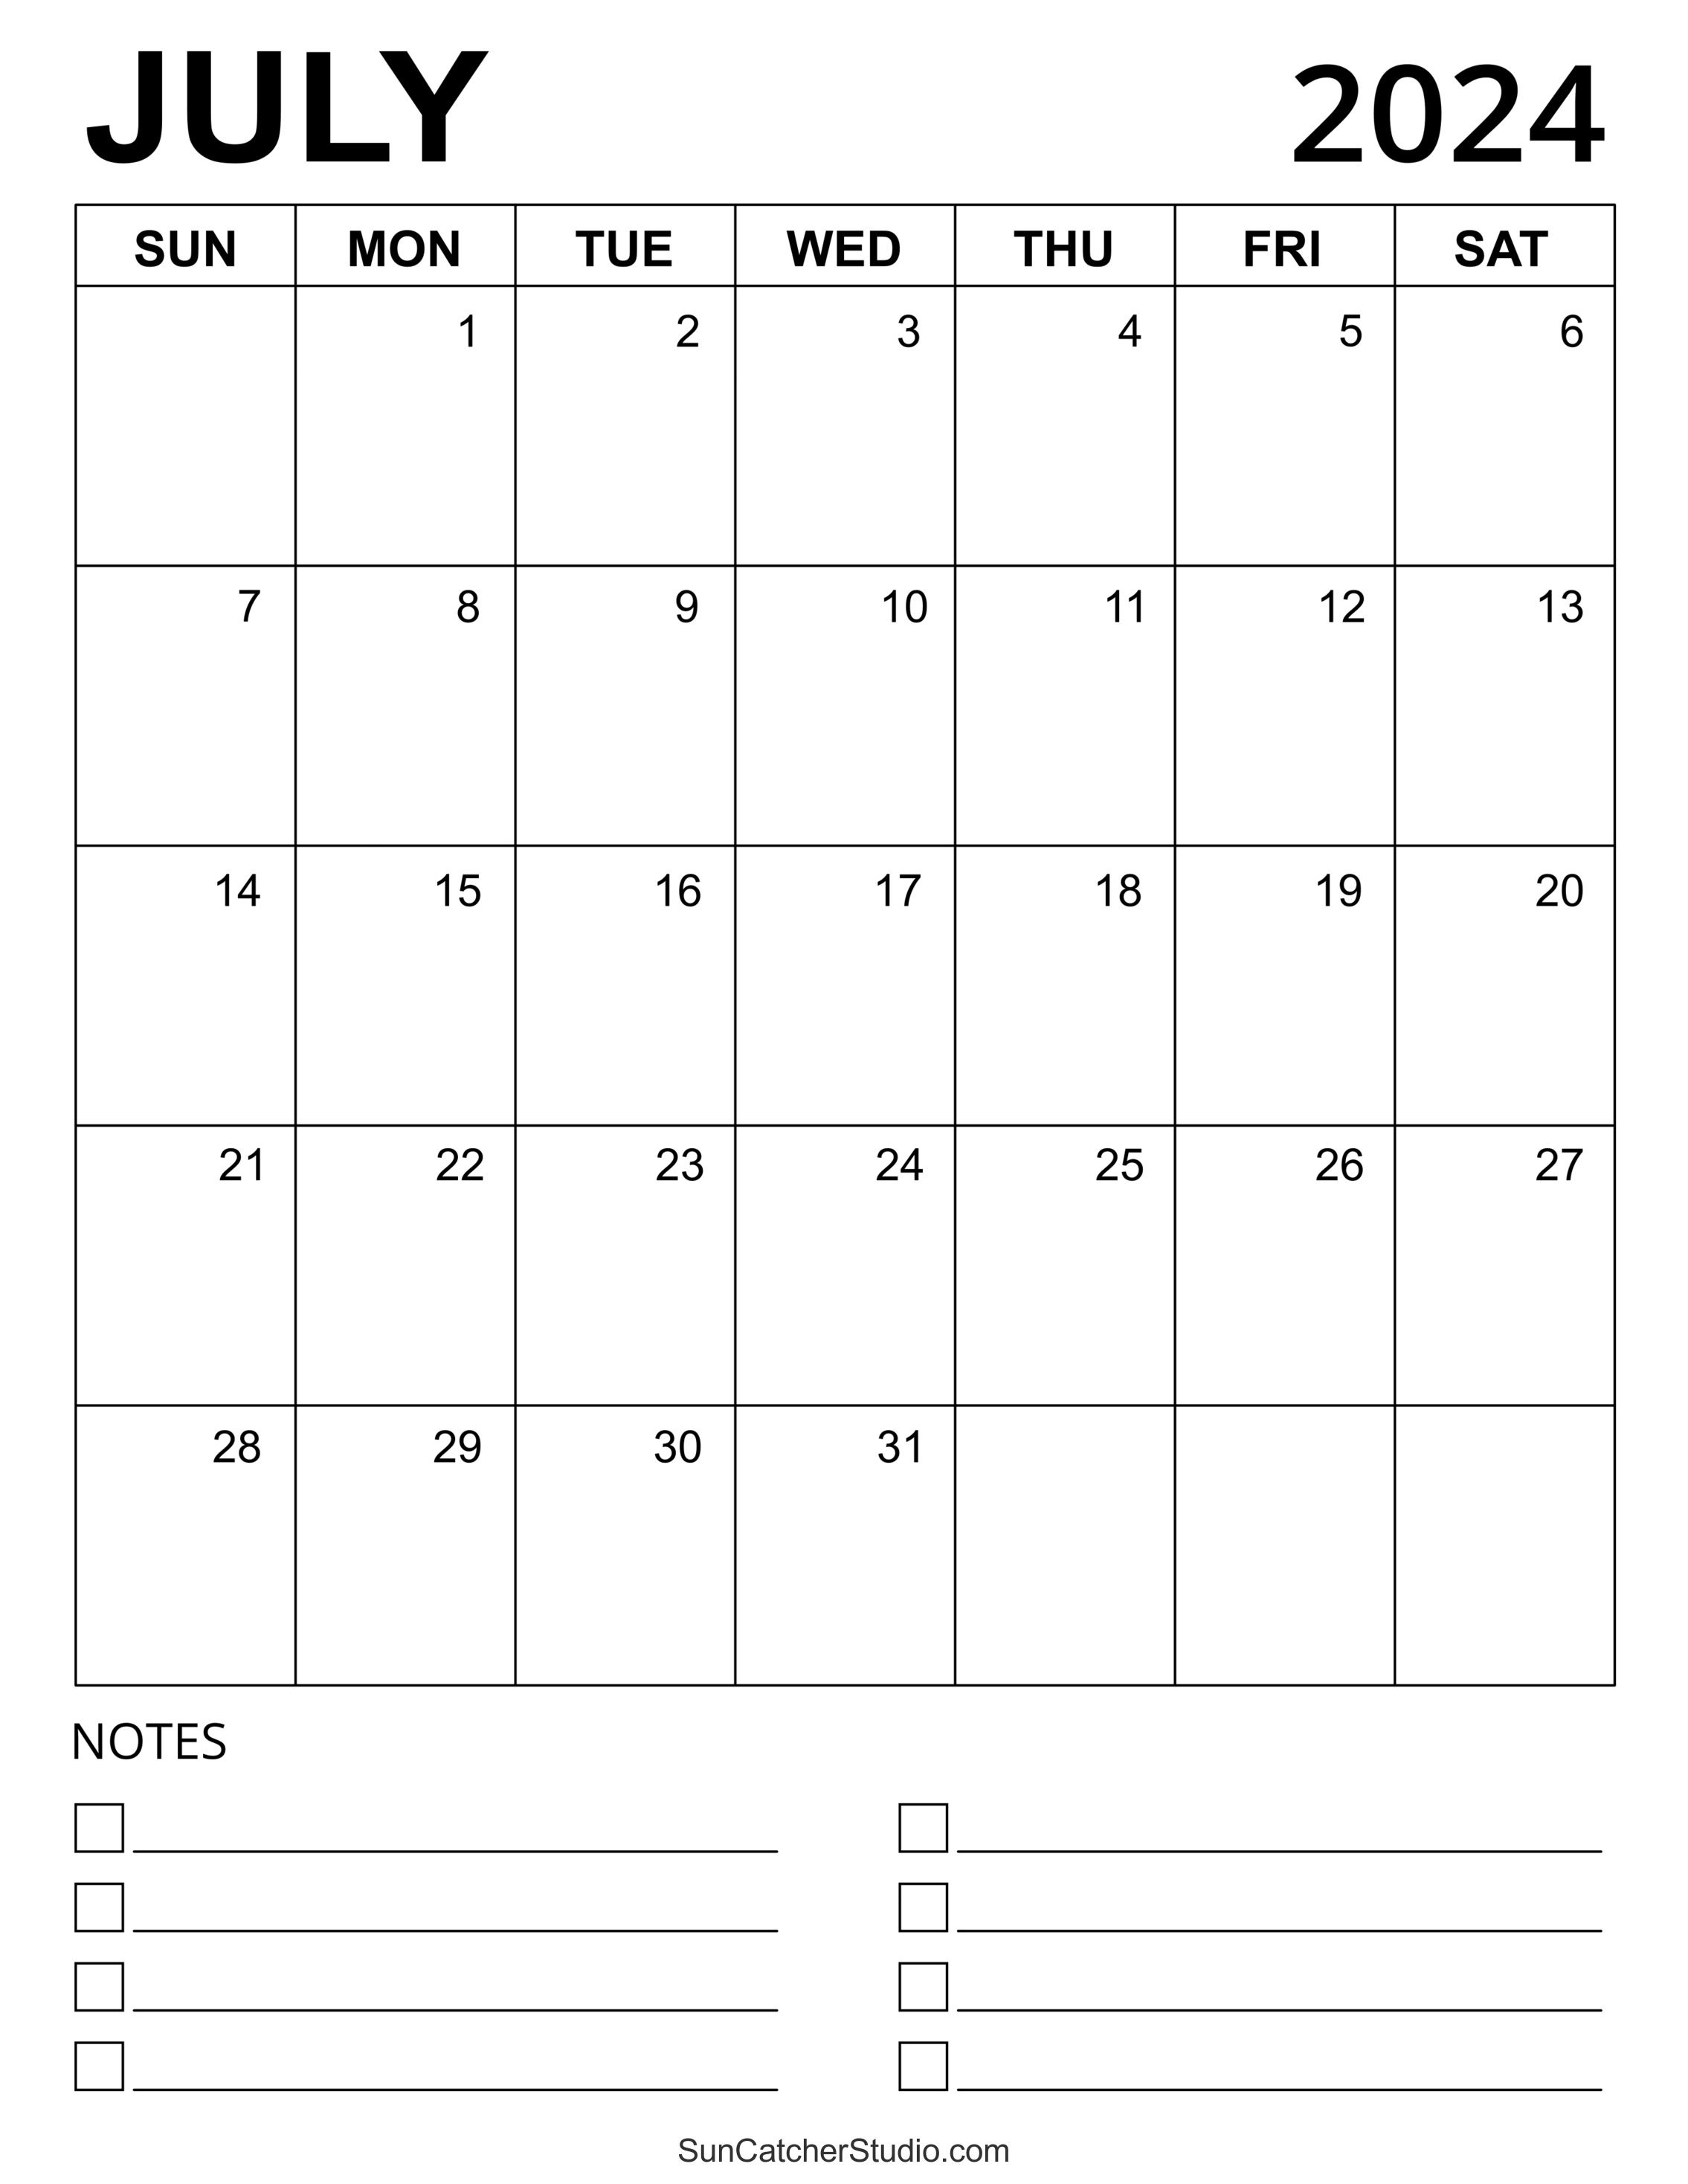 July 2024 Calendar (Free Printable) – Diy Projects, Patterns pertaining to Calendar July 2024 With Notes